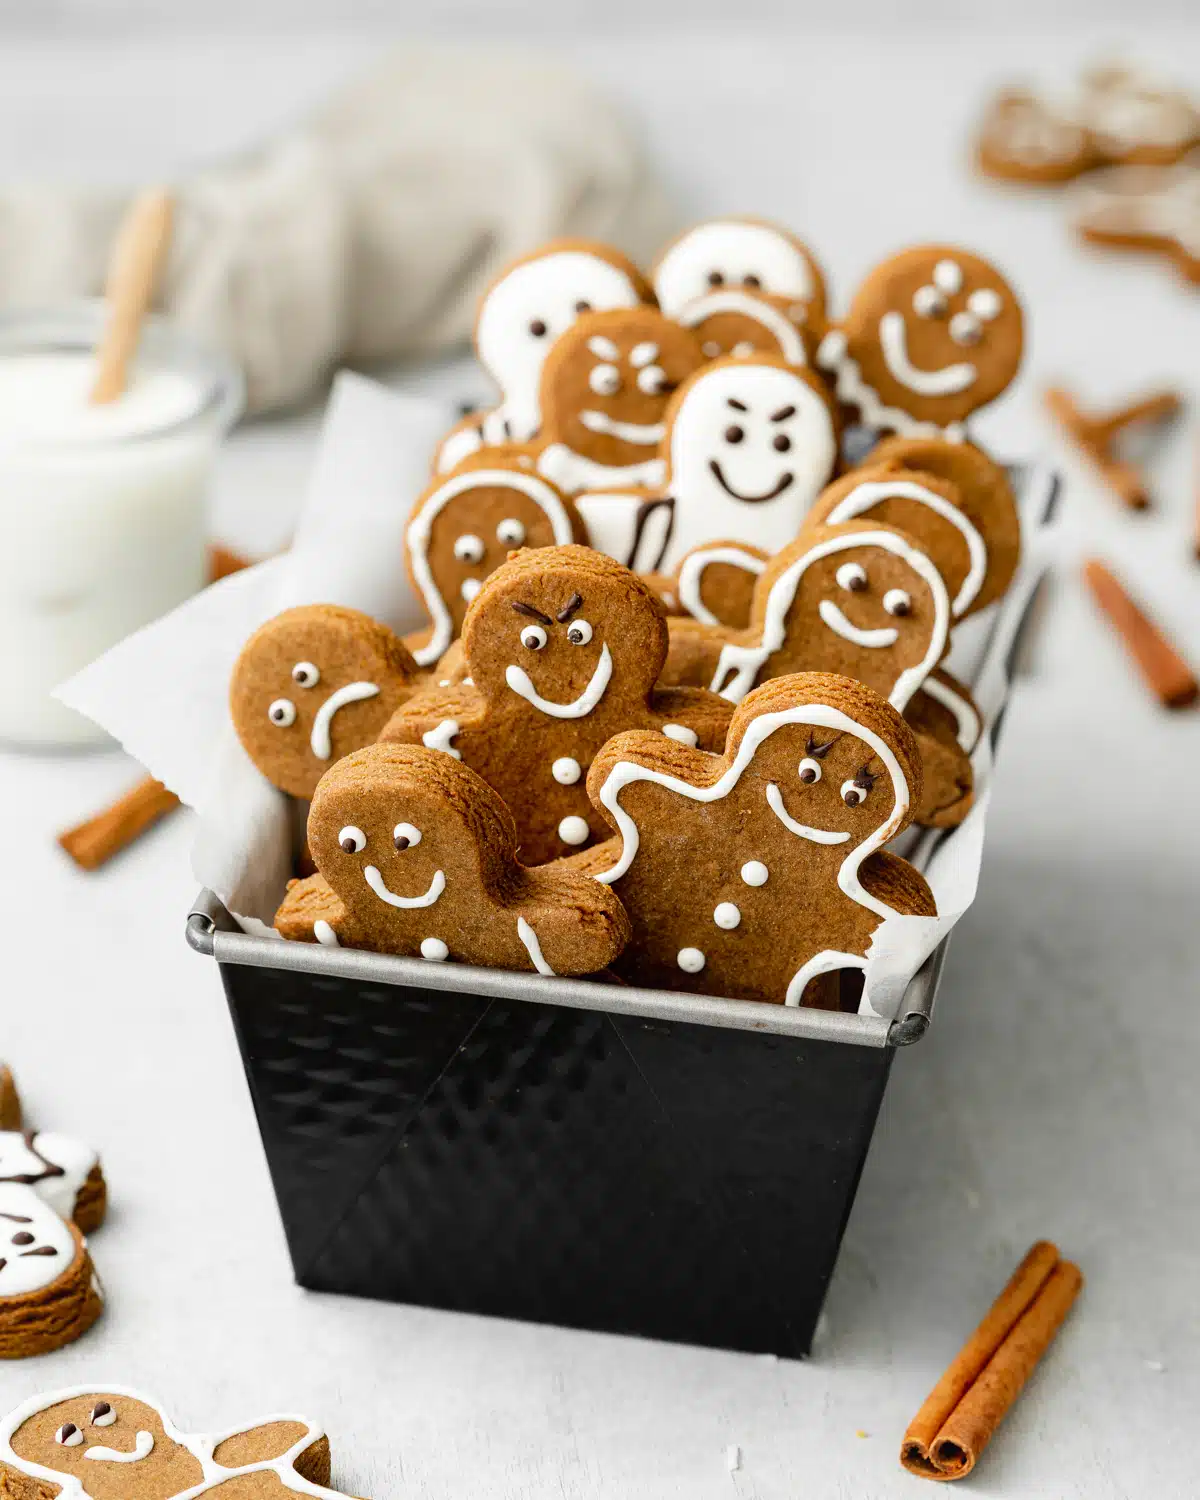 gingerbread men in a loaf pan on a grey surface.